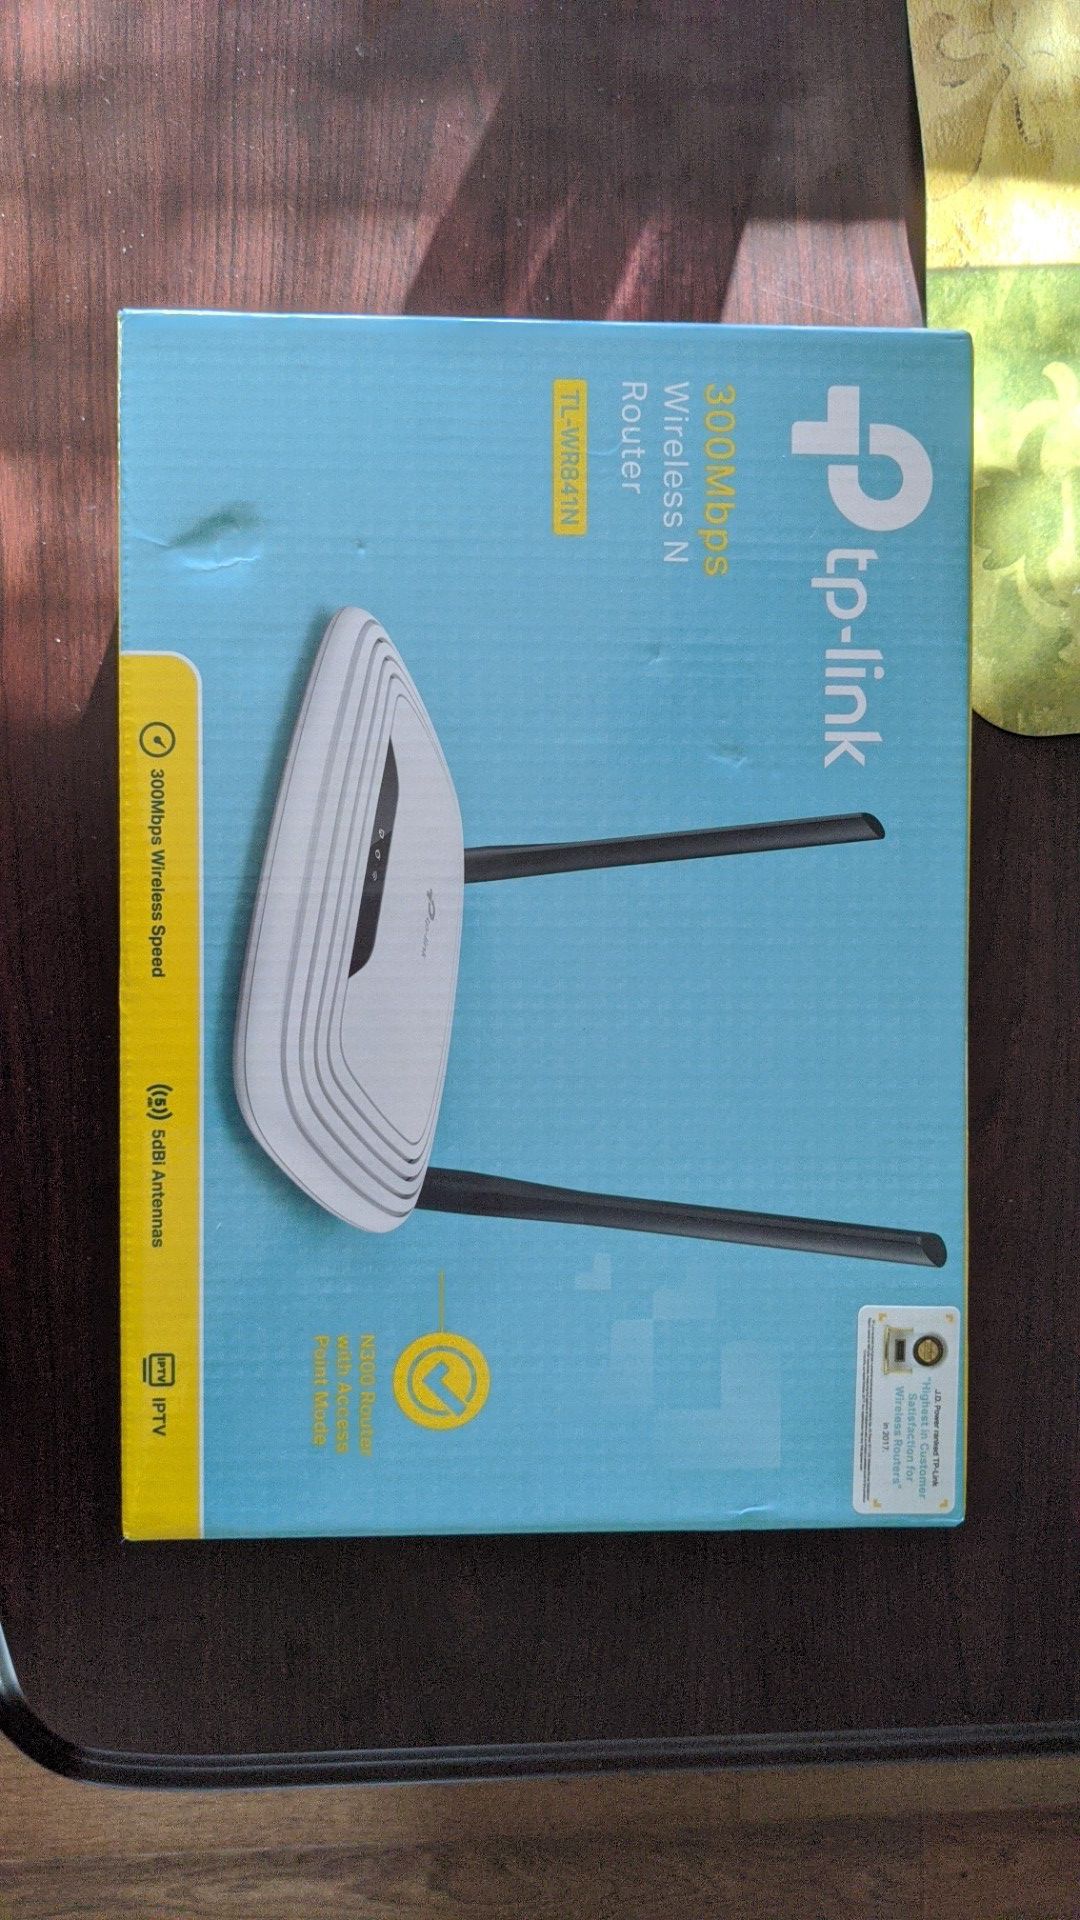 TP Link Wireless Router